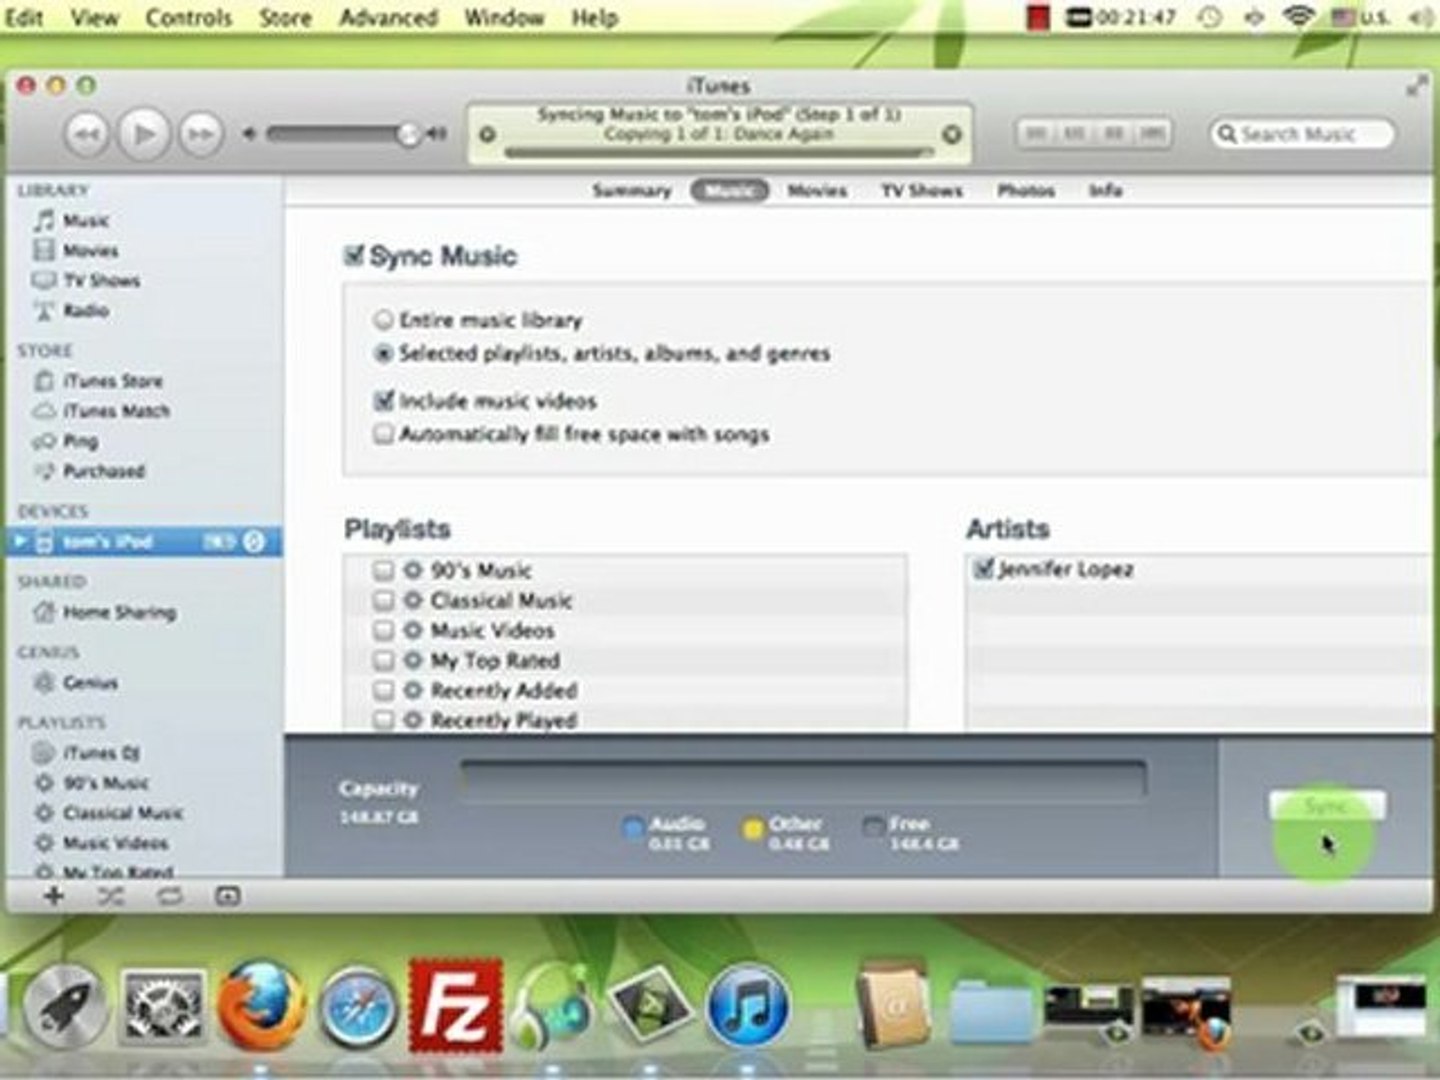 How to Save songs from VEVO music videos on Mac